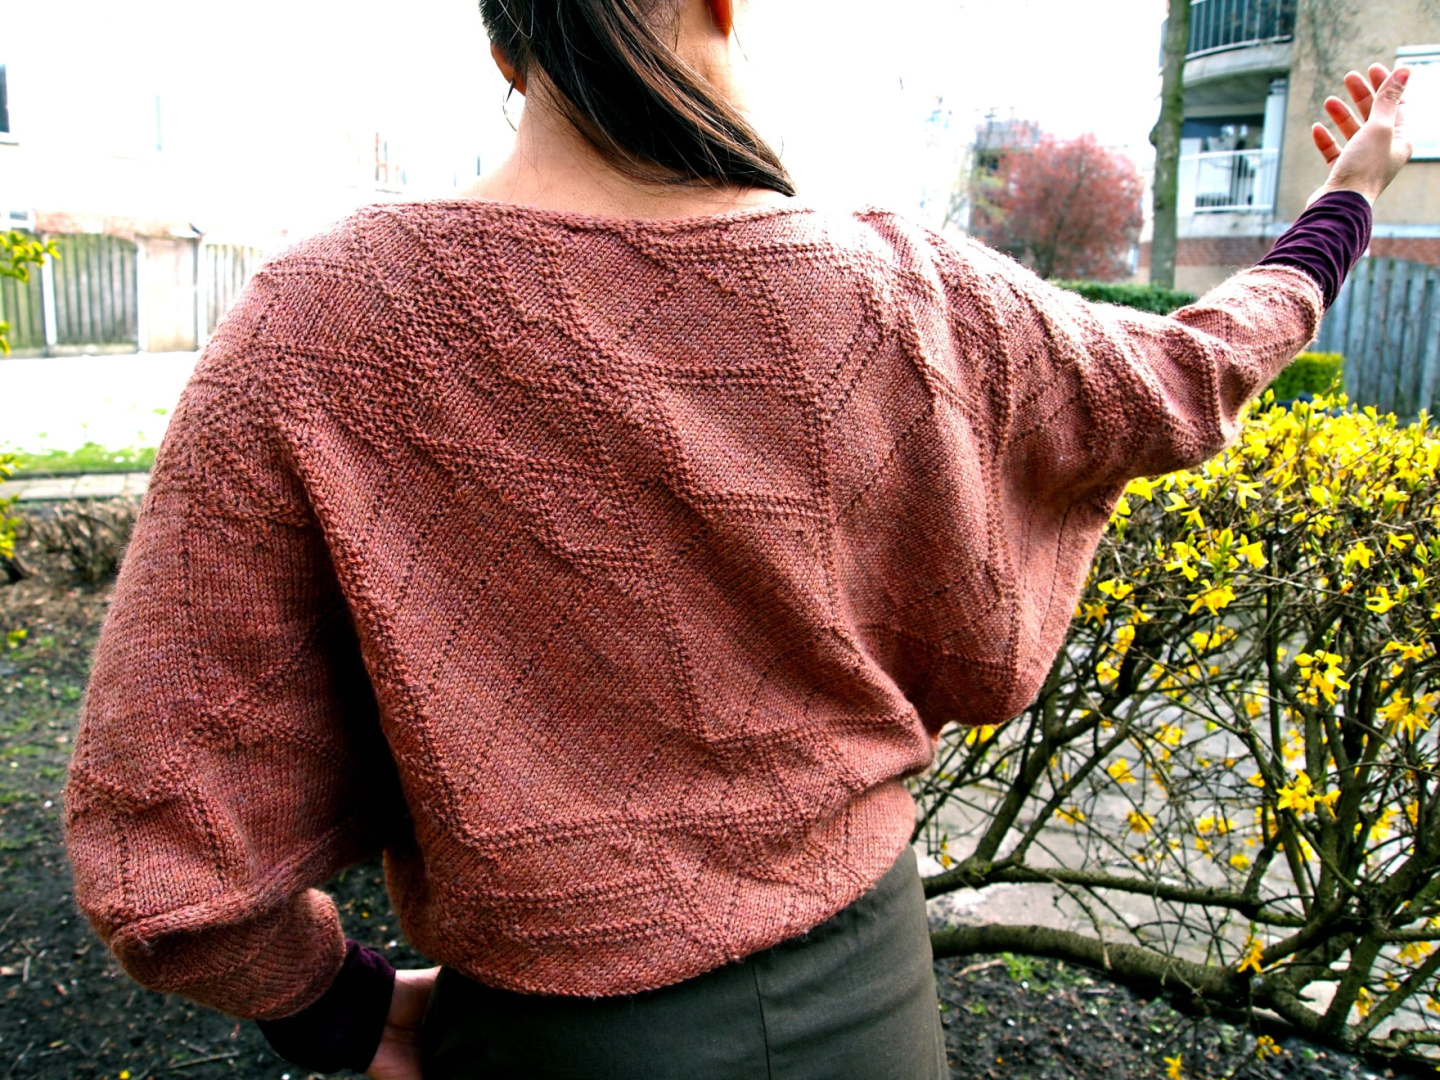 Solitons Sweater: a batwing (dolman sleeve) sweater with a Cellular Automata texture